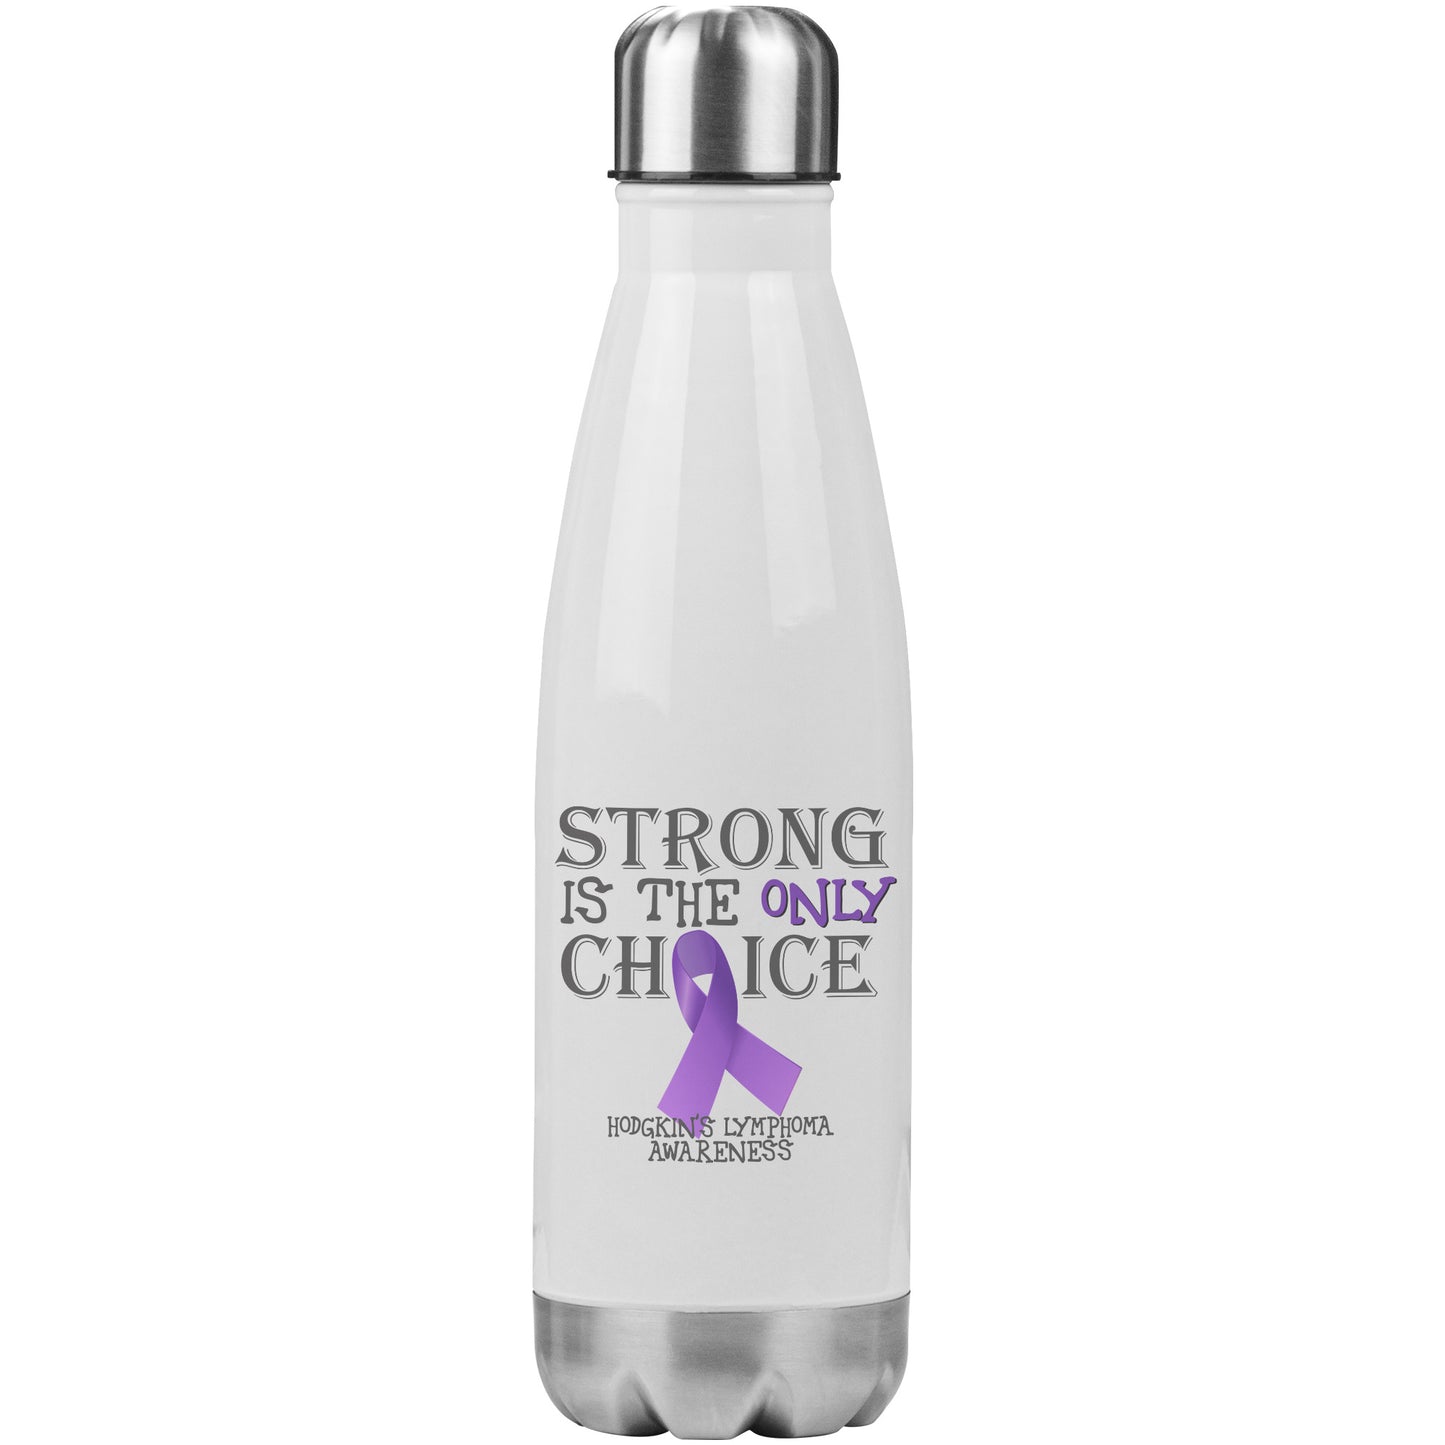 Strong is the Only Choice -Hodgkin's Lymphoma Awareness 20oz Insulated Water Bottle